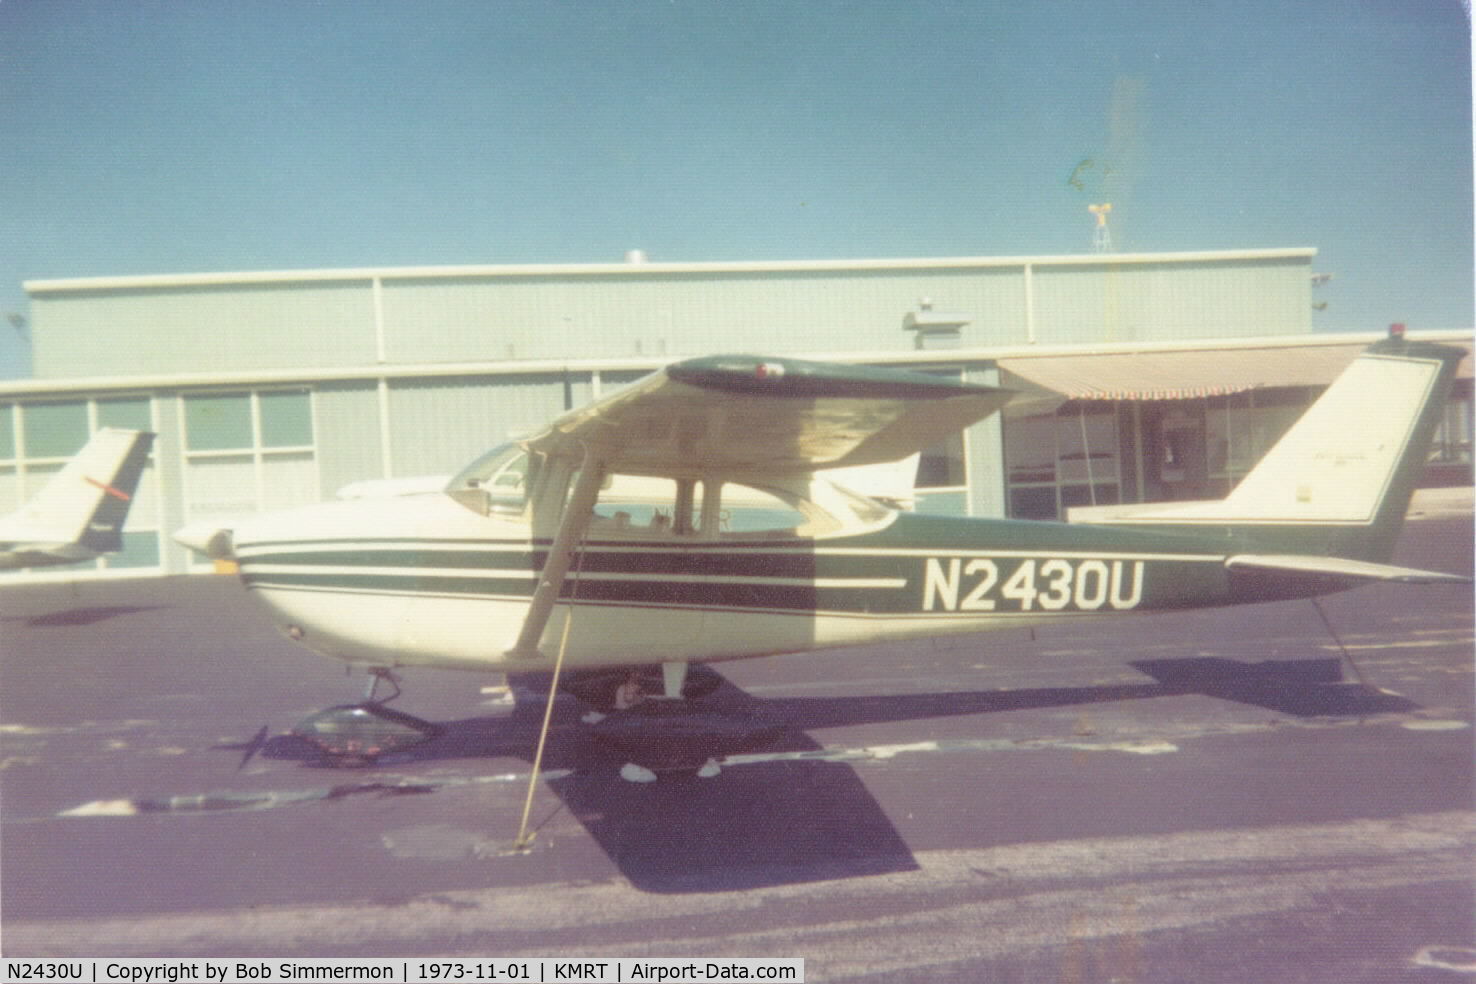 N2430U, 1963 Cessna 172D C/N 17250030, Marysville, OH not long after Dad bought her